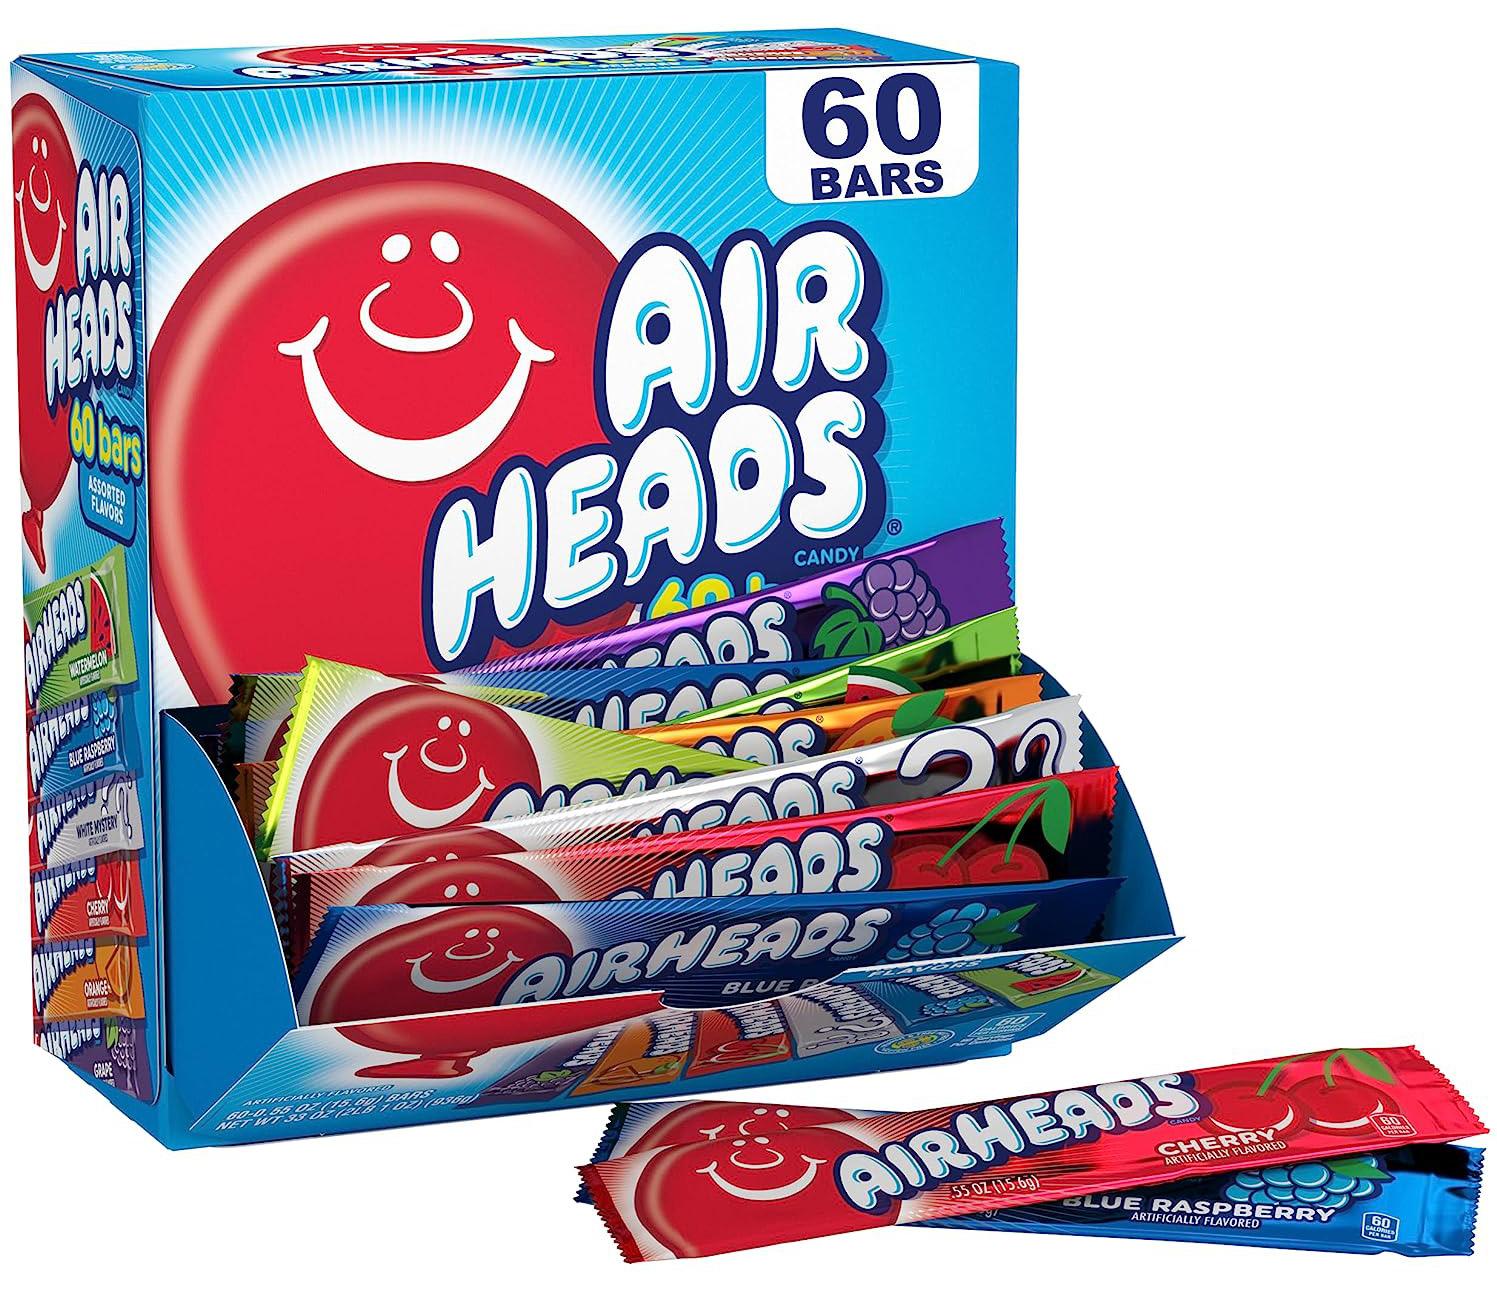 Airheads Candy Bars 60 Pack for $7.38